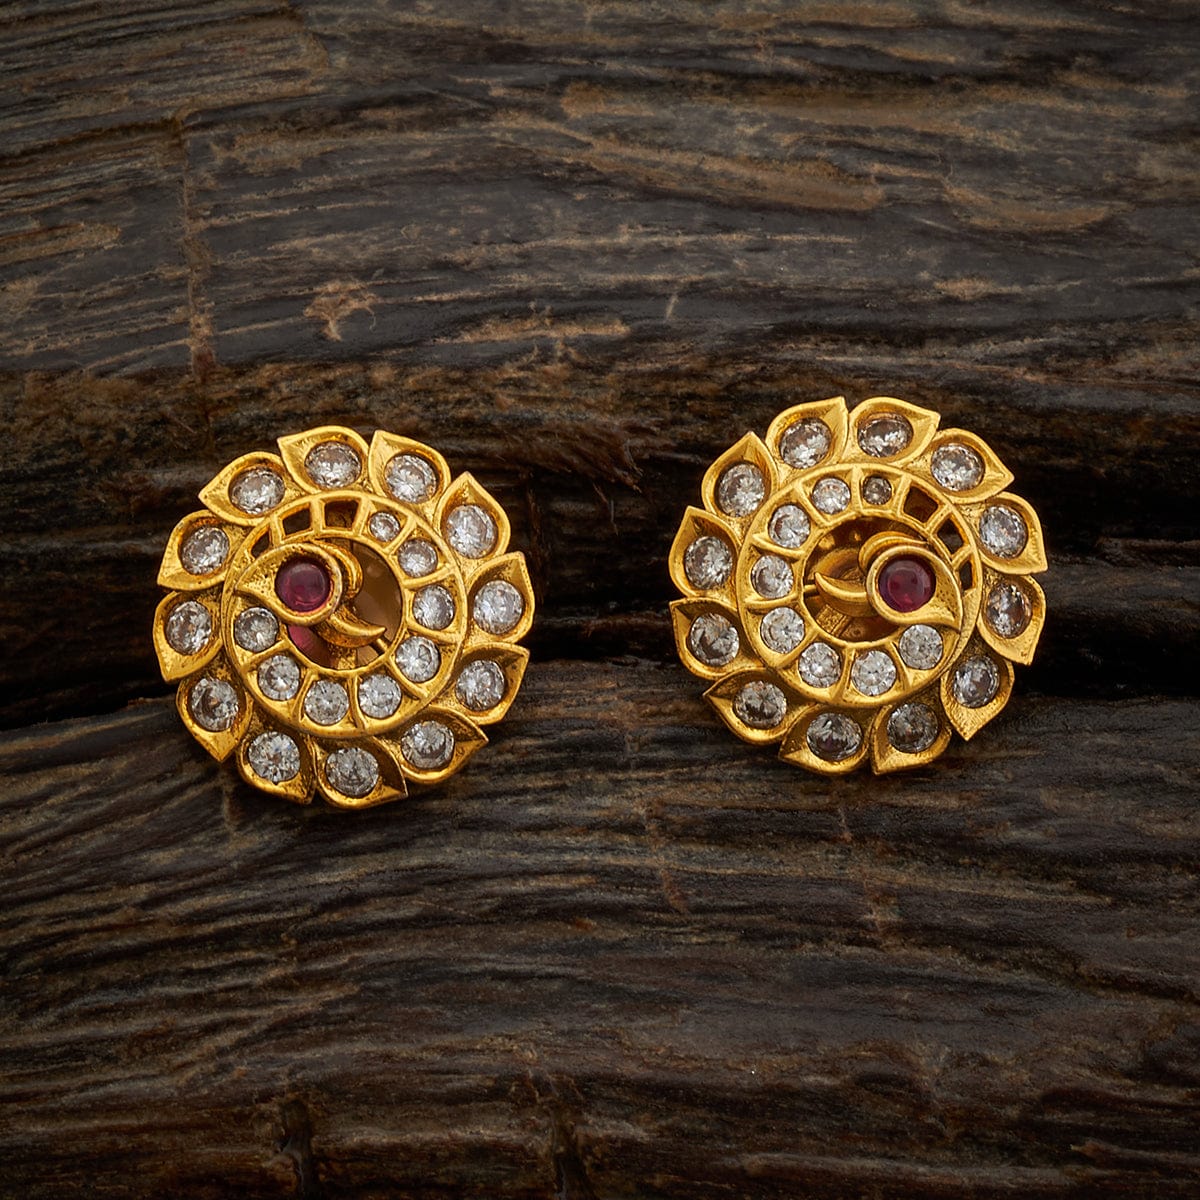 Aggregate 125+ second earring designs best